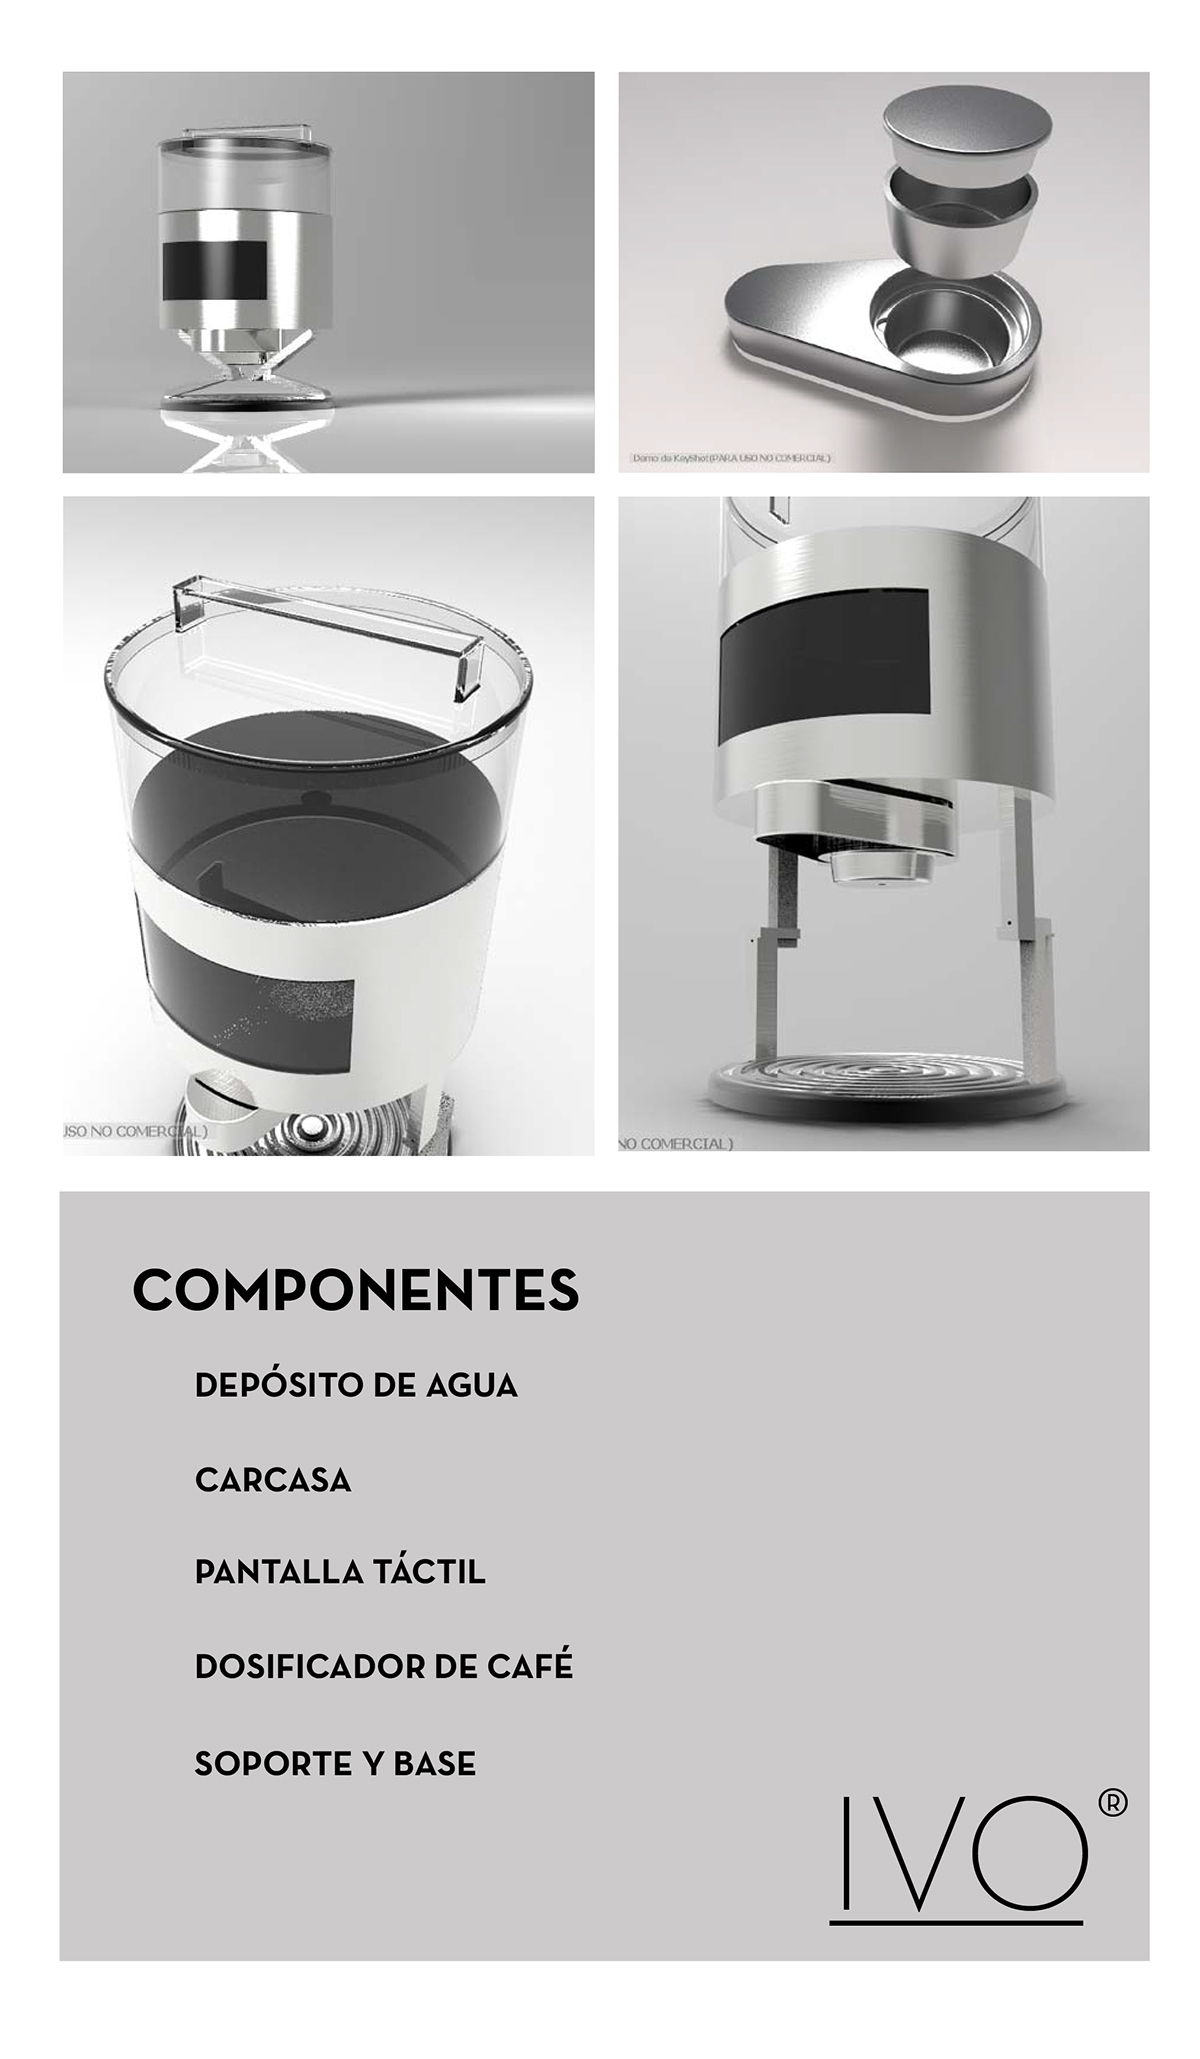 Coffee machine cafetera Coffee product